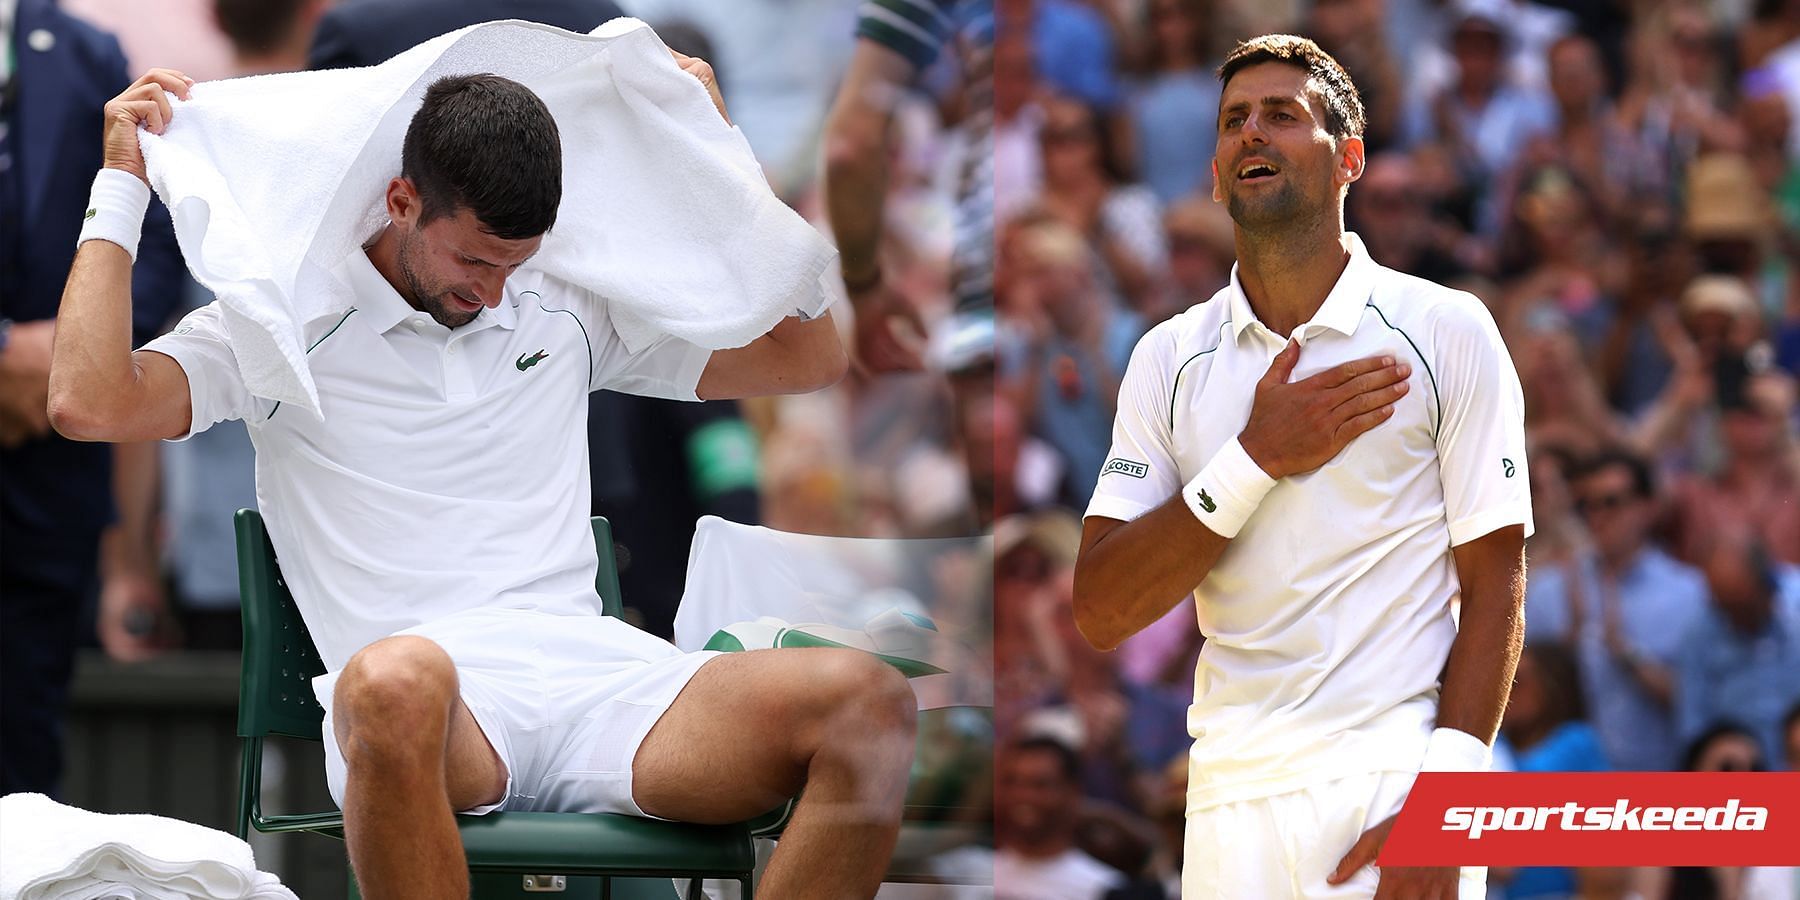 Novak Djokovic shed light on his emotional state after winning the Wimbledon title in a recent interview